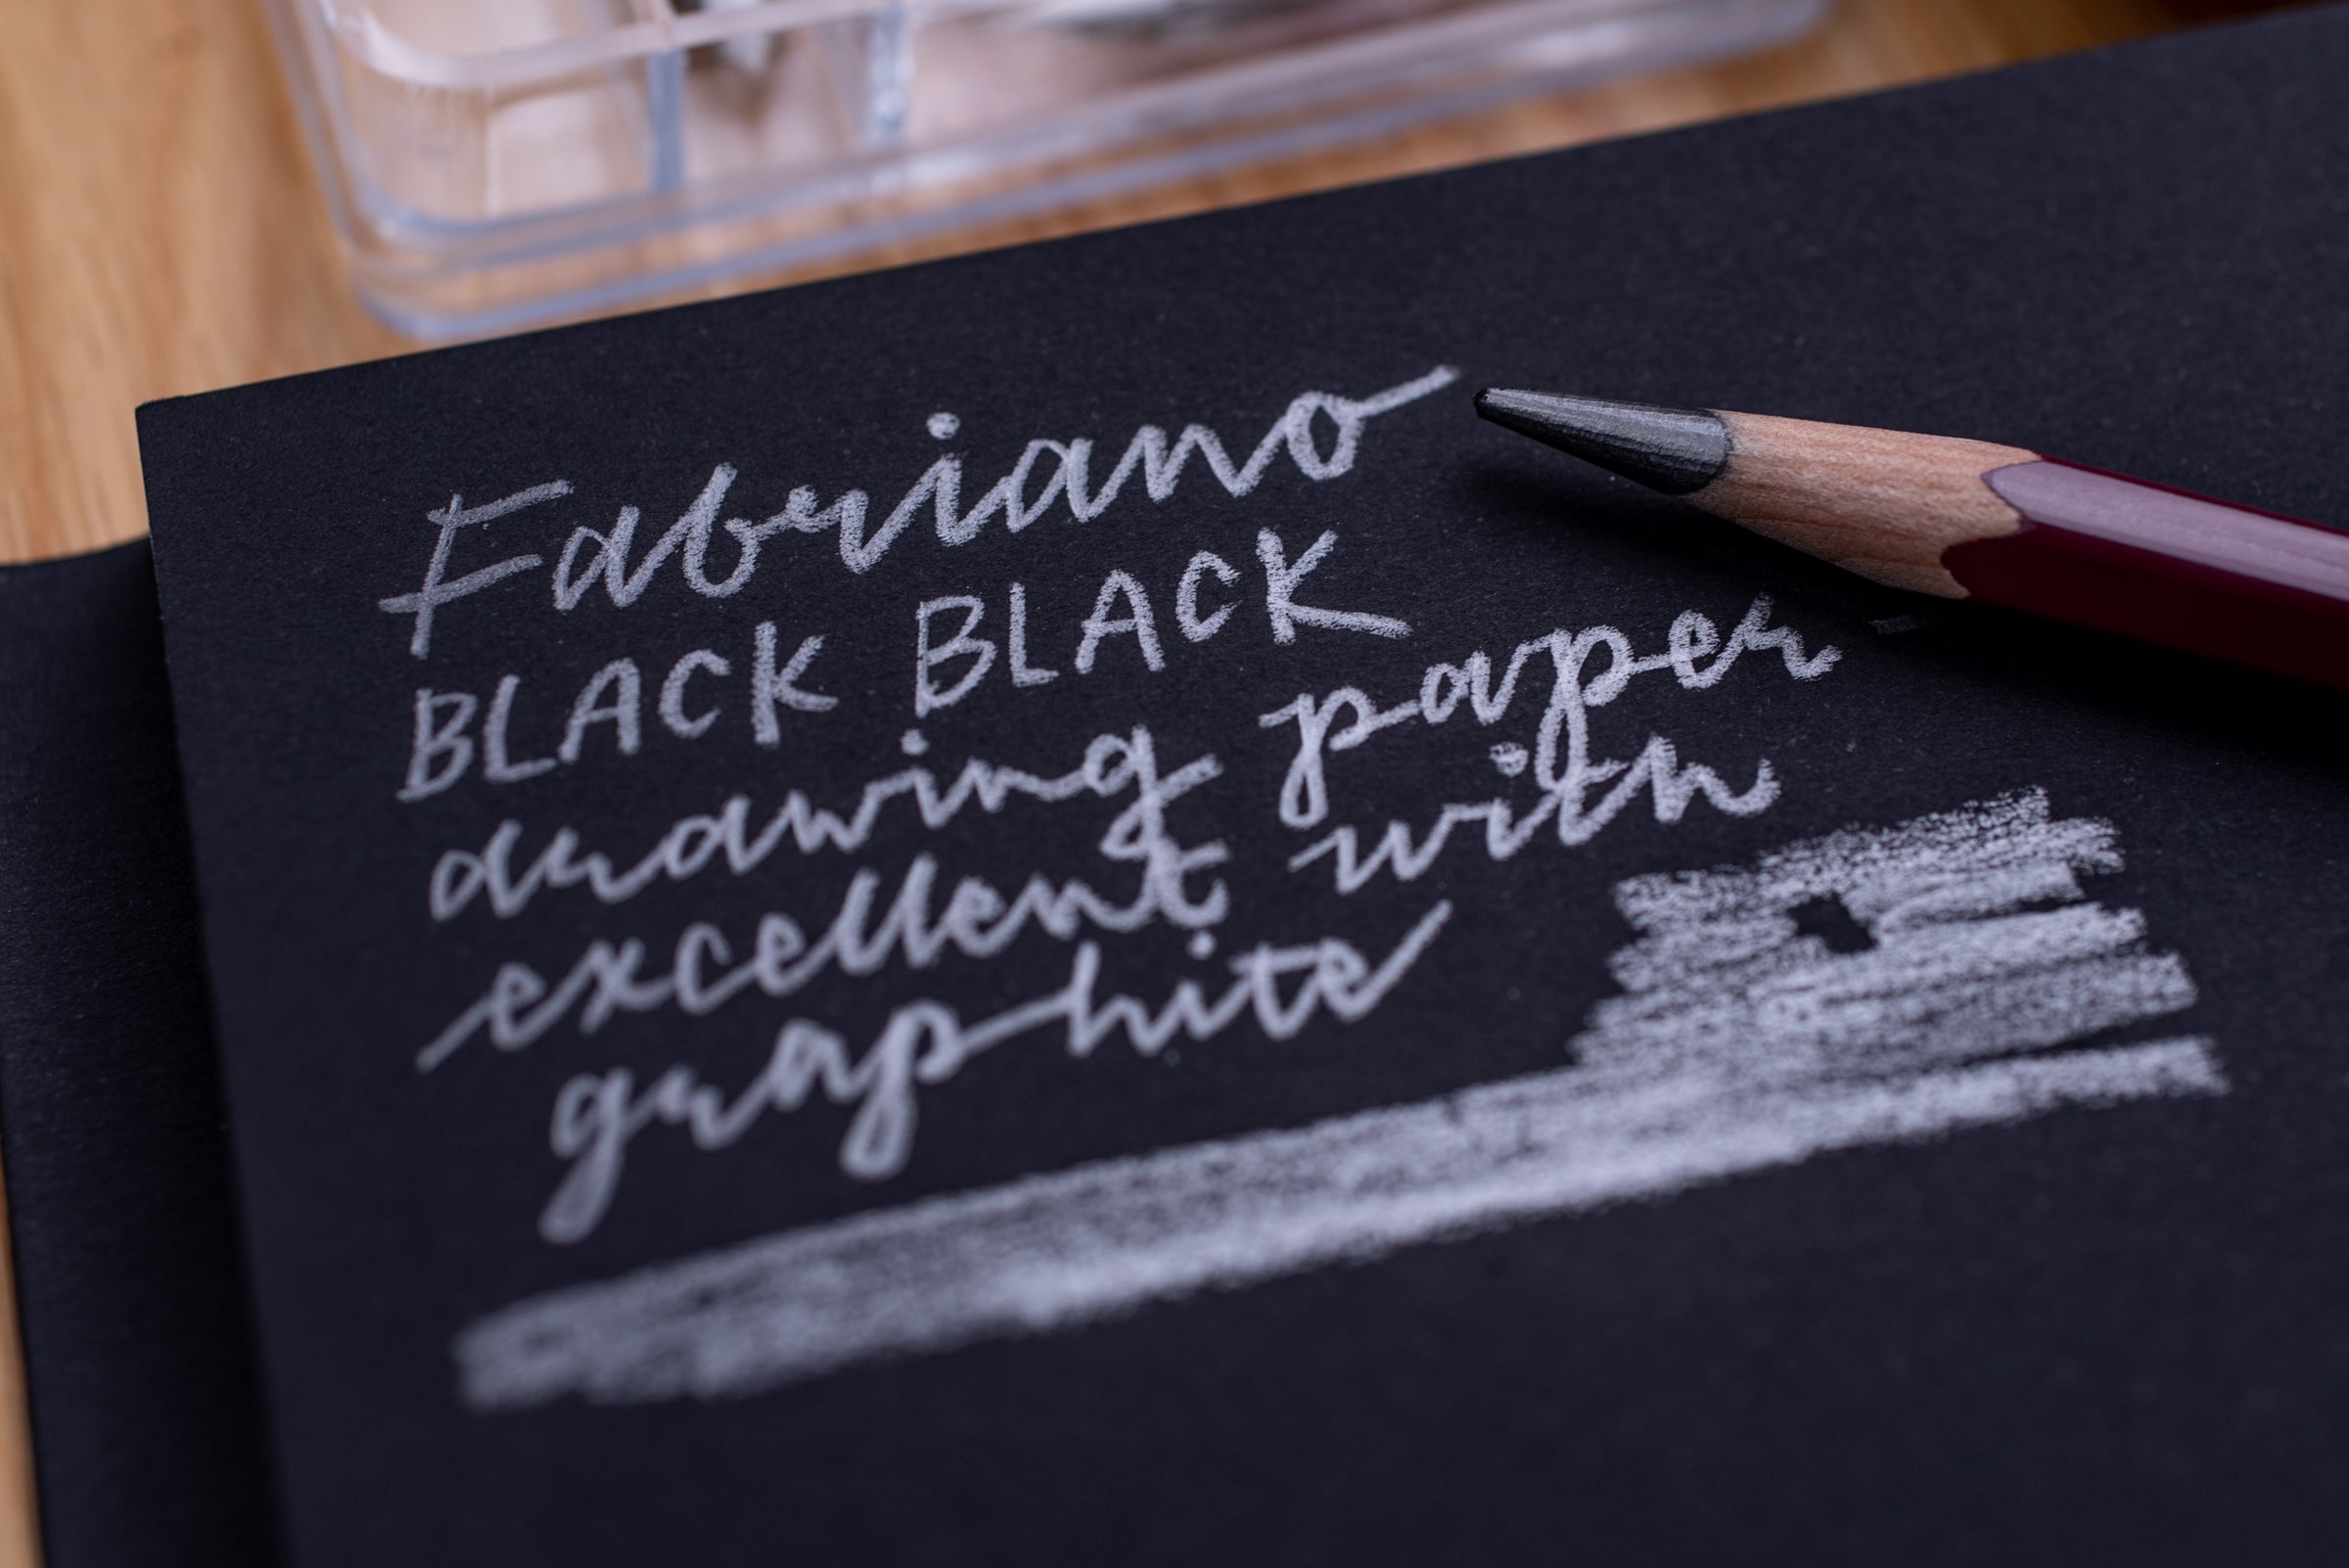 Fabriano Black Black Drawing and Sketching Pads